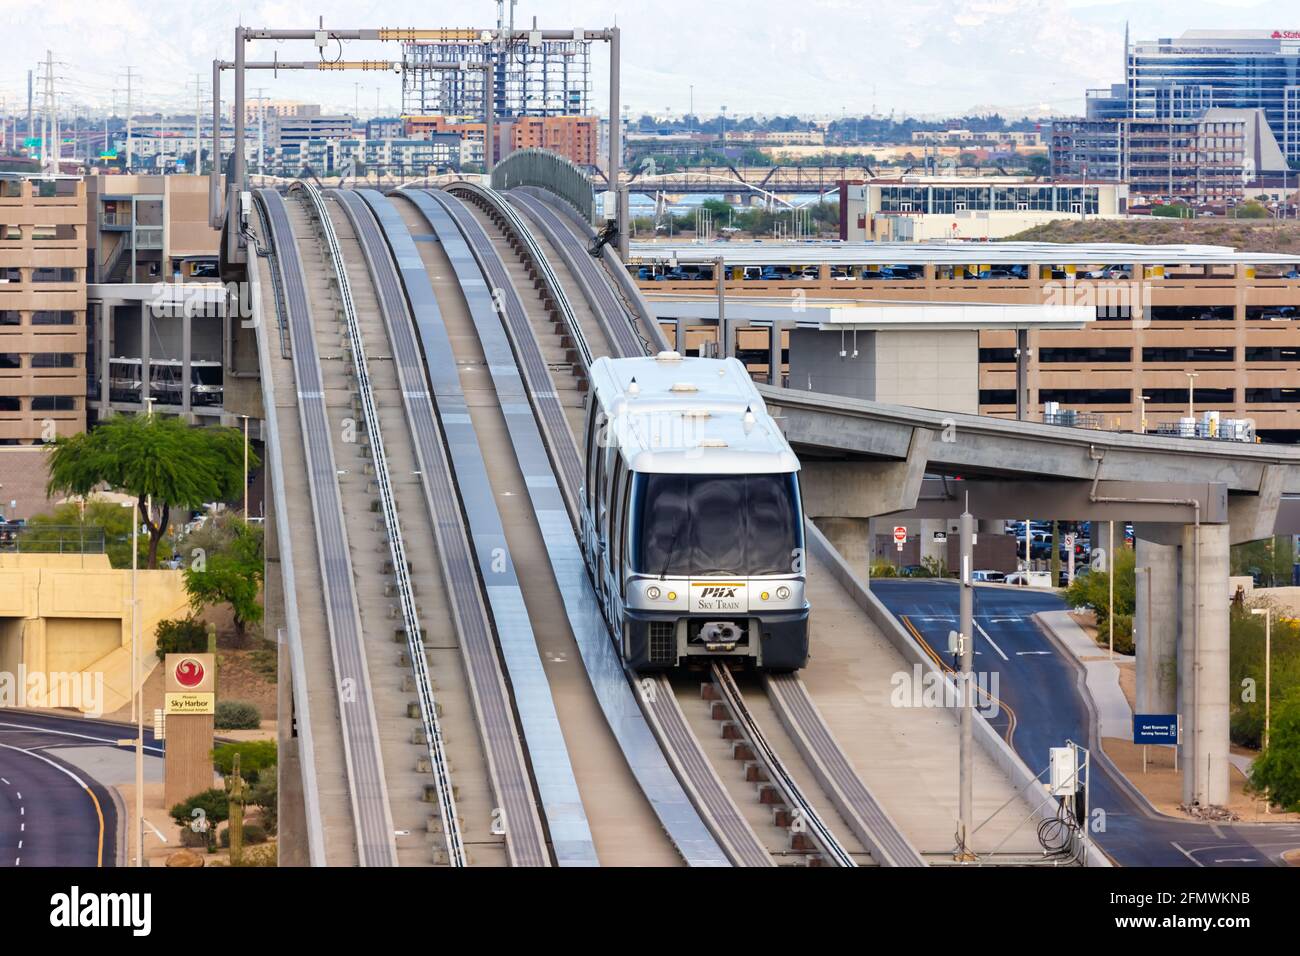 Phoenix, Arizona - April 8, 2019: Sky Train Airport Shuttle People Mover at Phoenix Sky Harbor airport (PHX) in the United States. Stock Photo